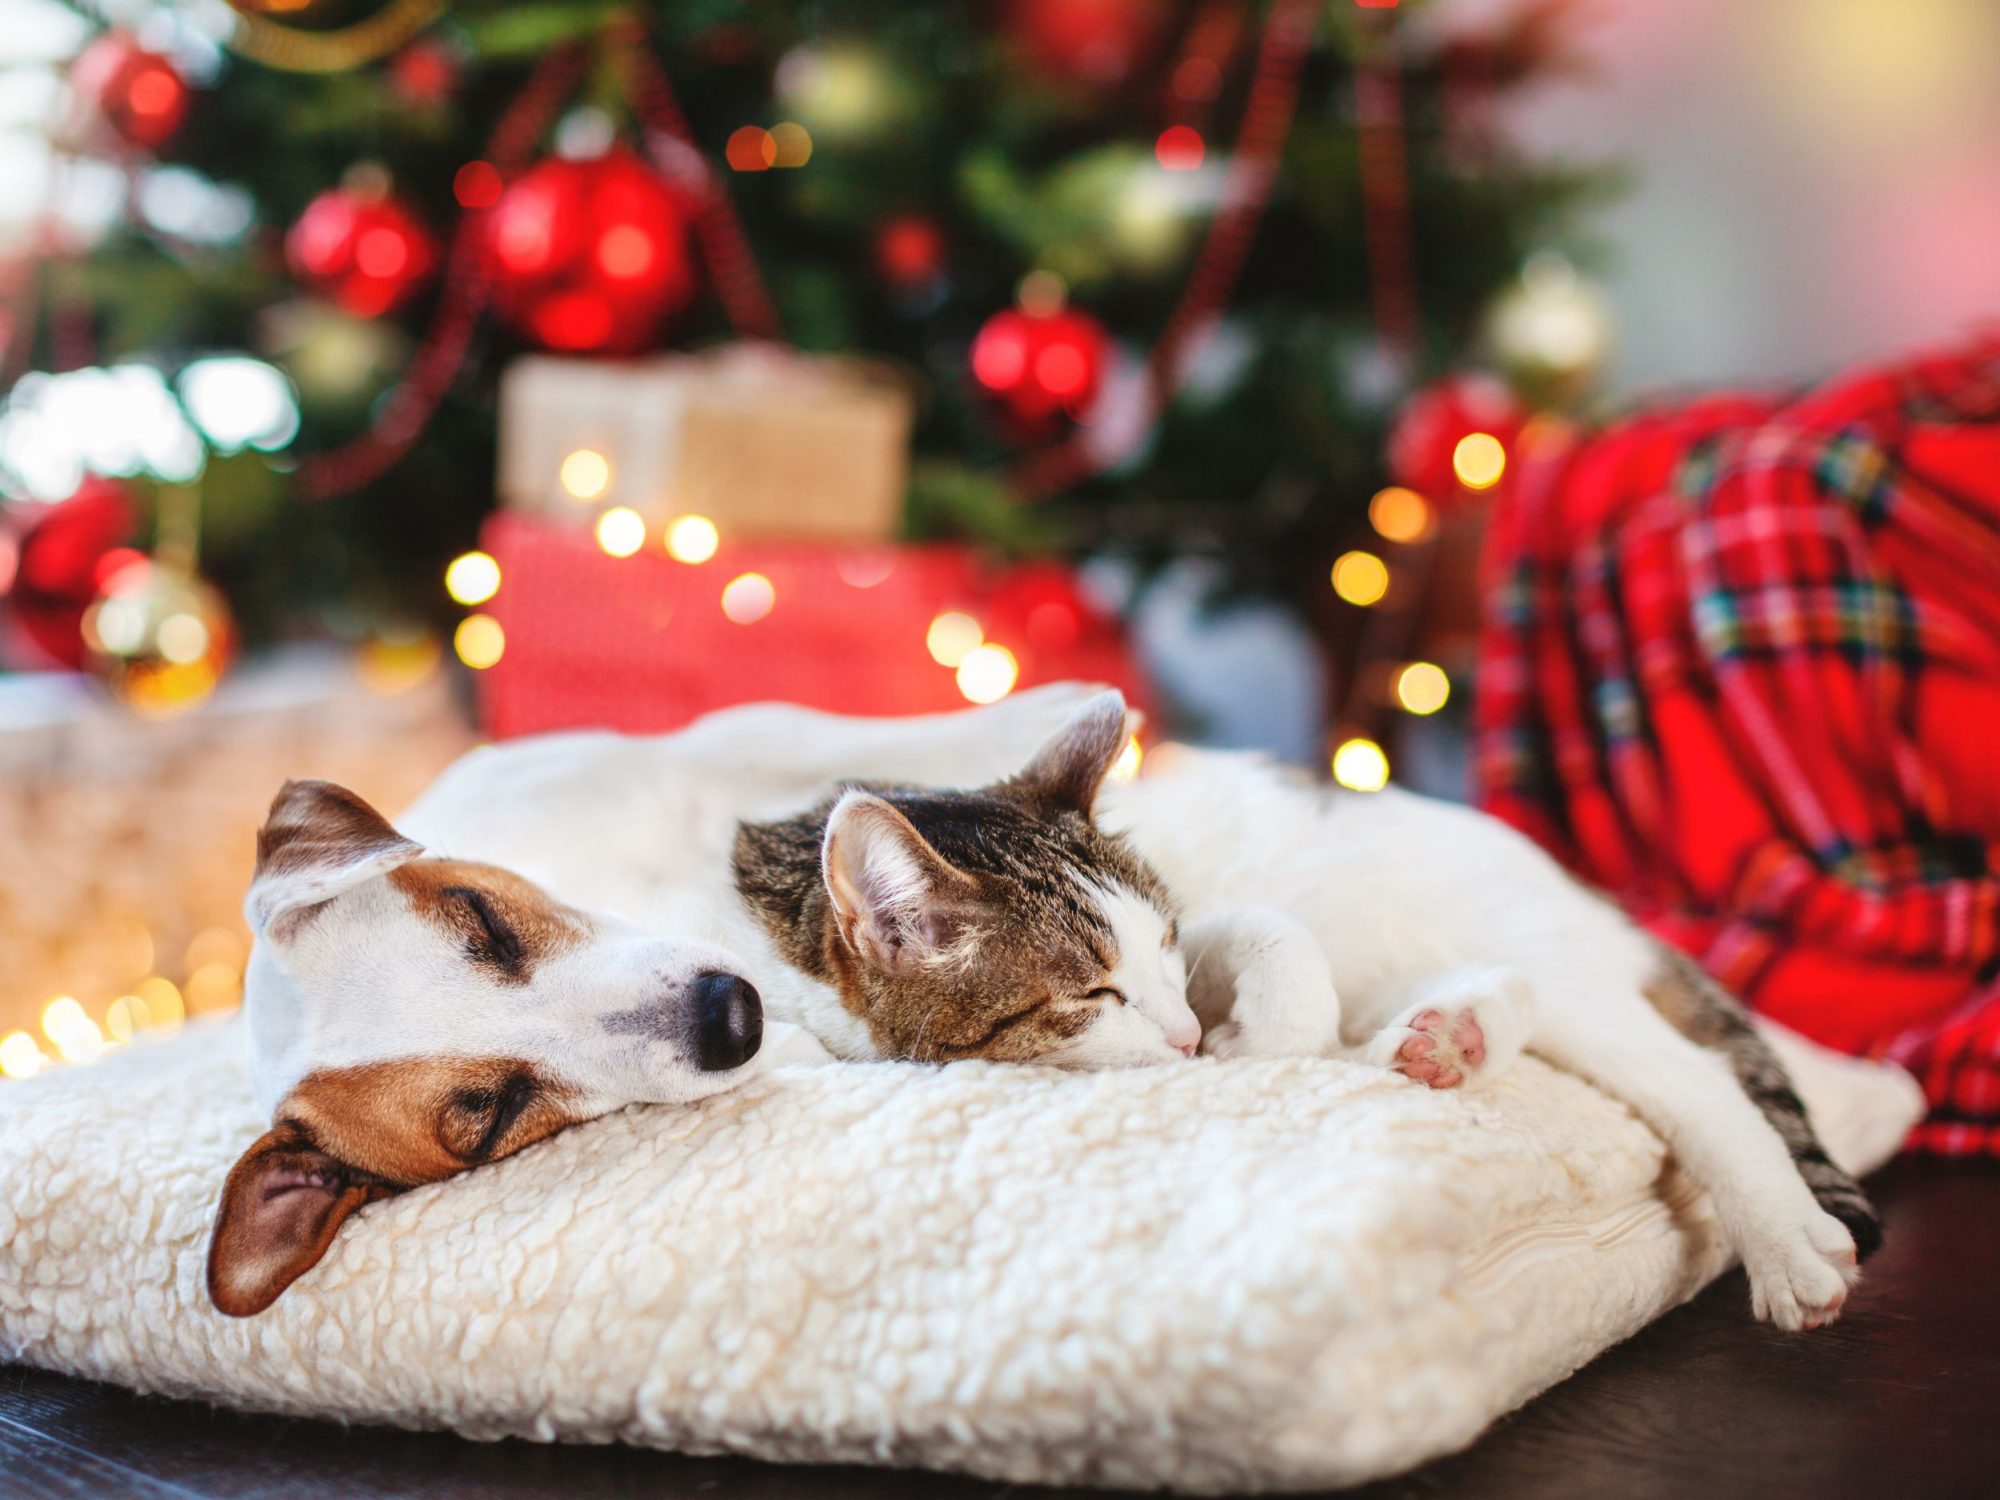 Dog and cat under Christmas tree.